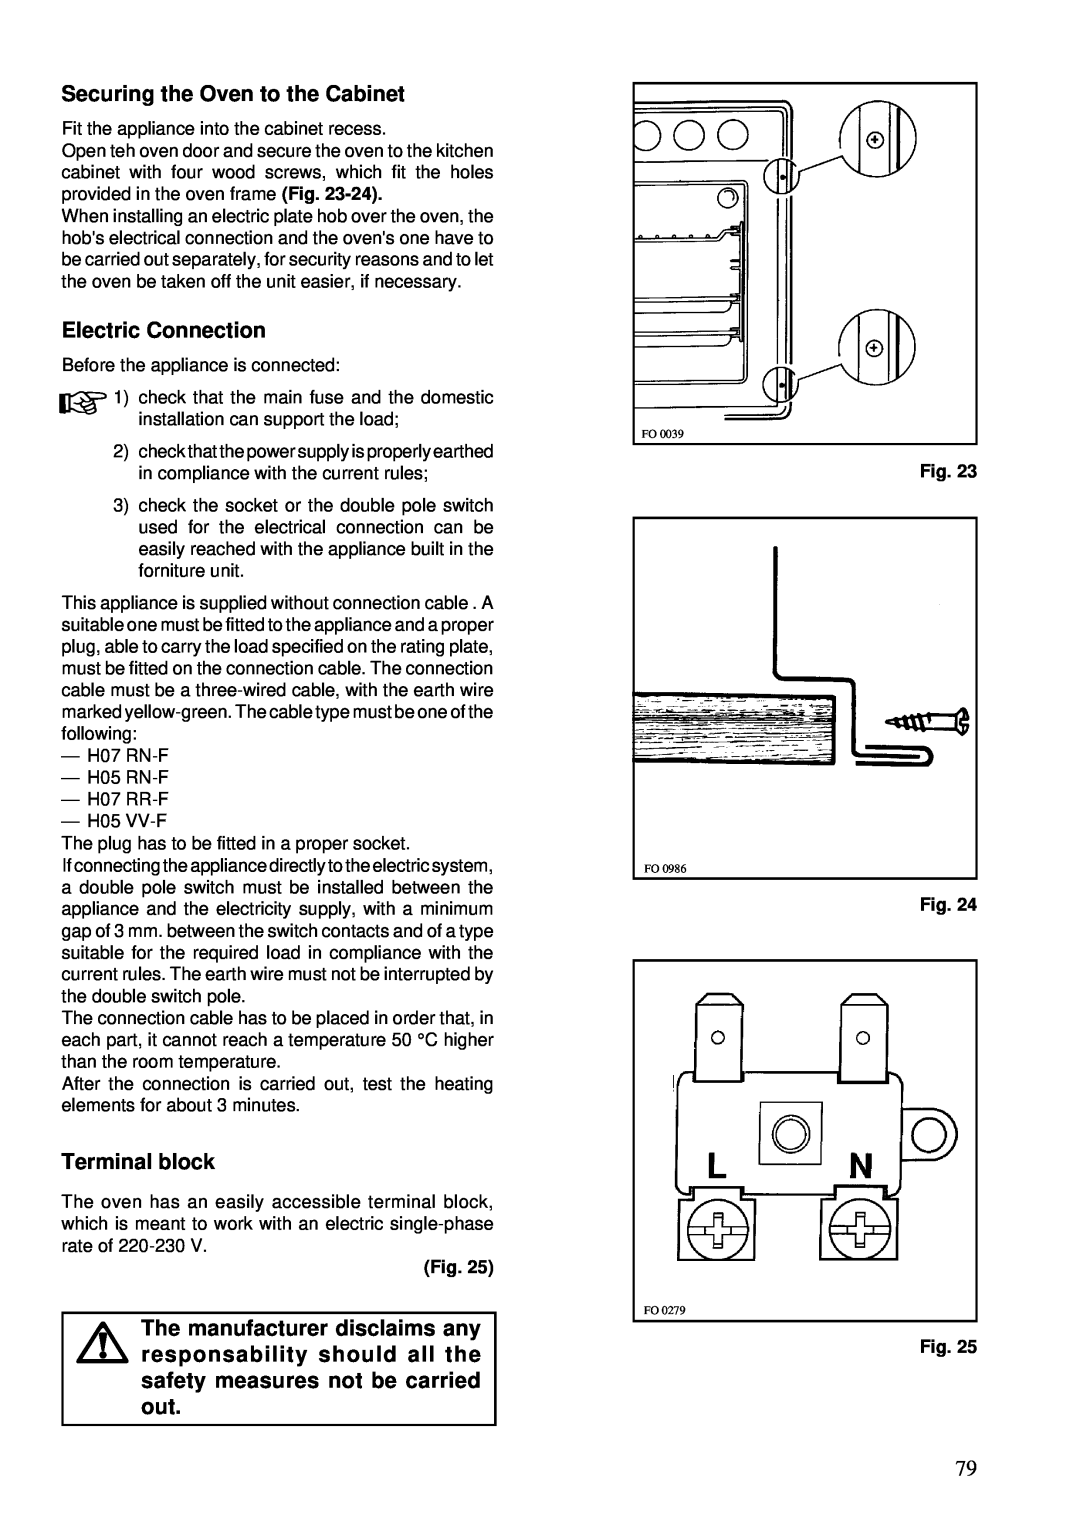 Zanussi ZBS 862 manual Securing the Oven to the Cabinet, Electric Connection, Terminal block 